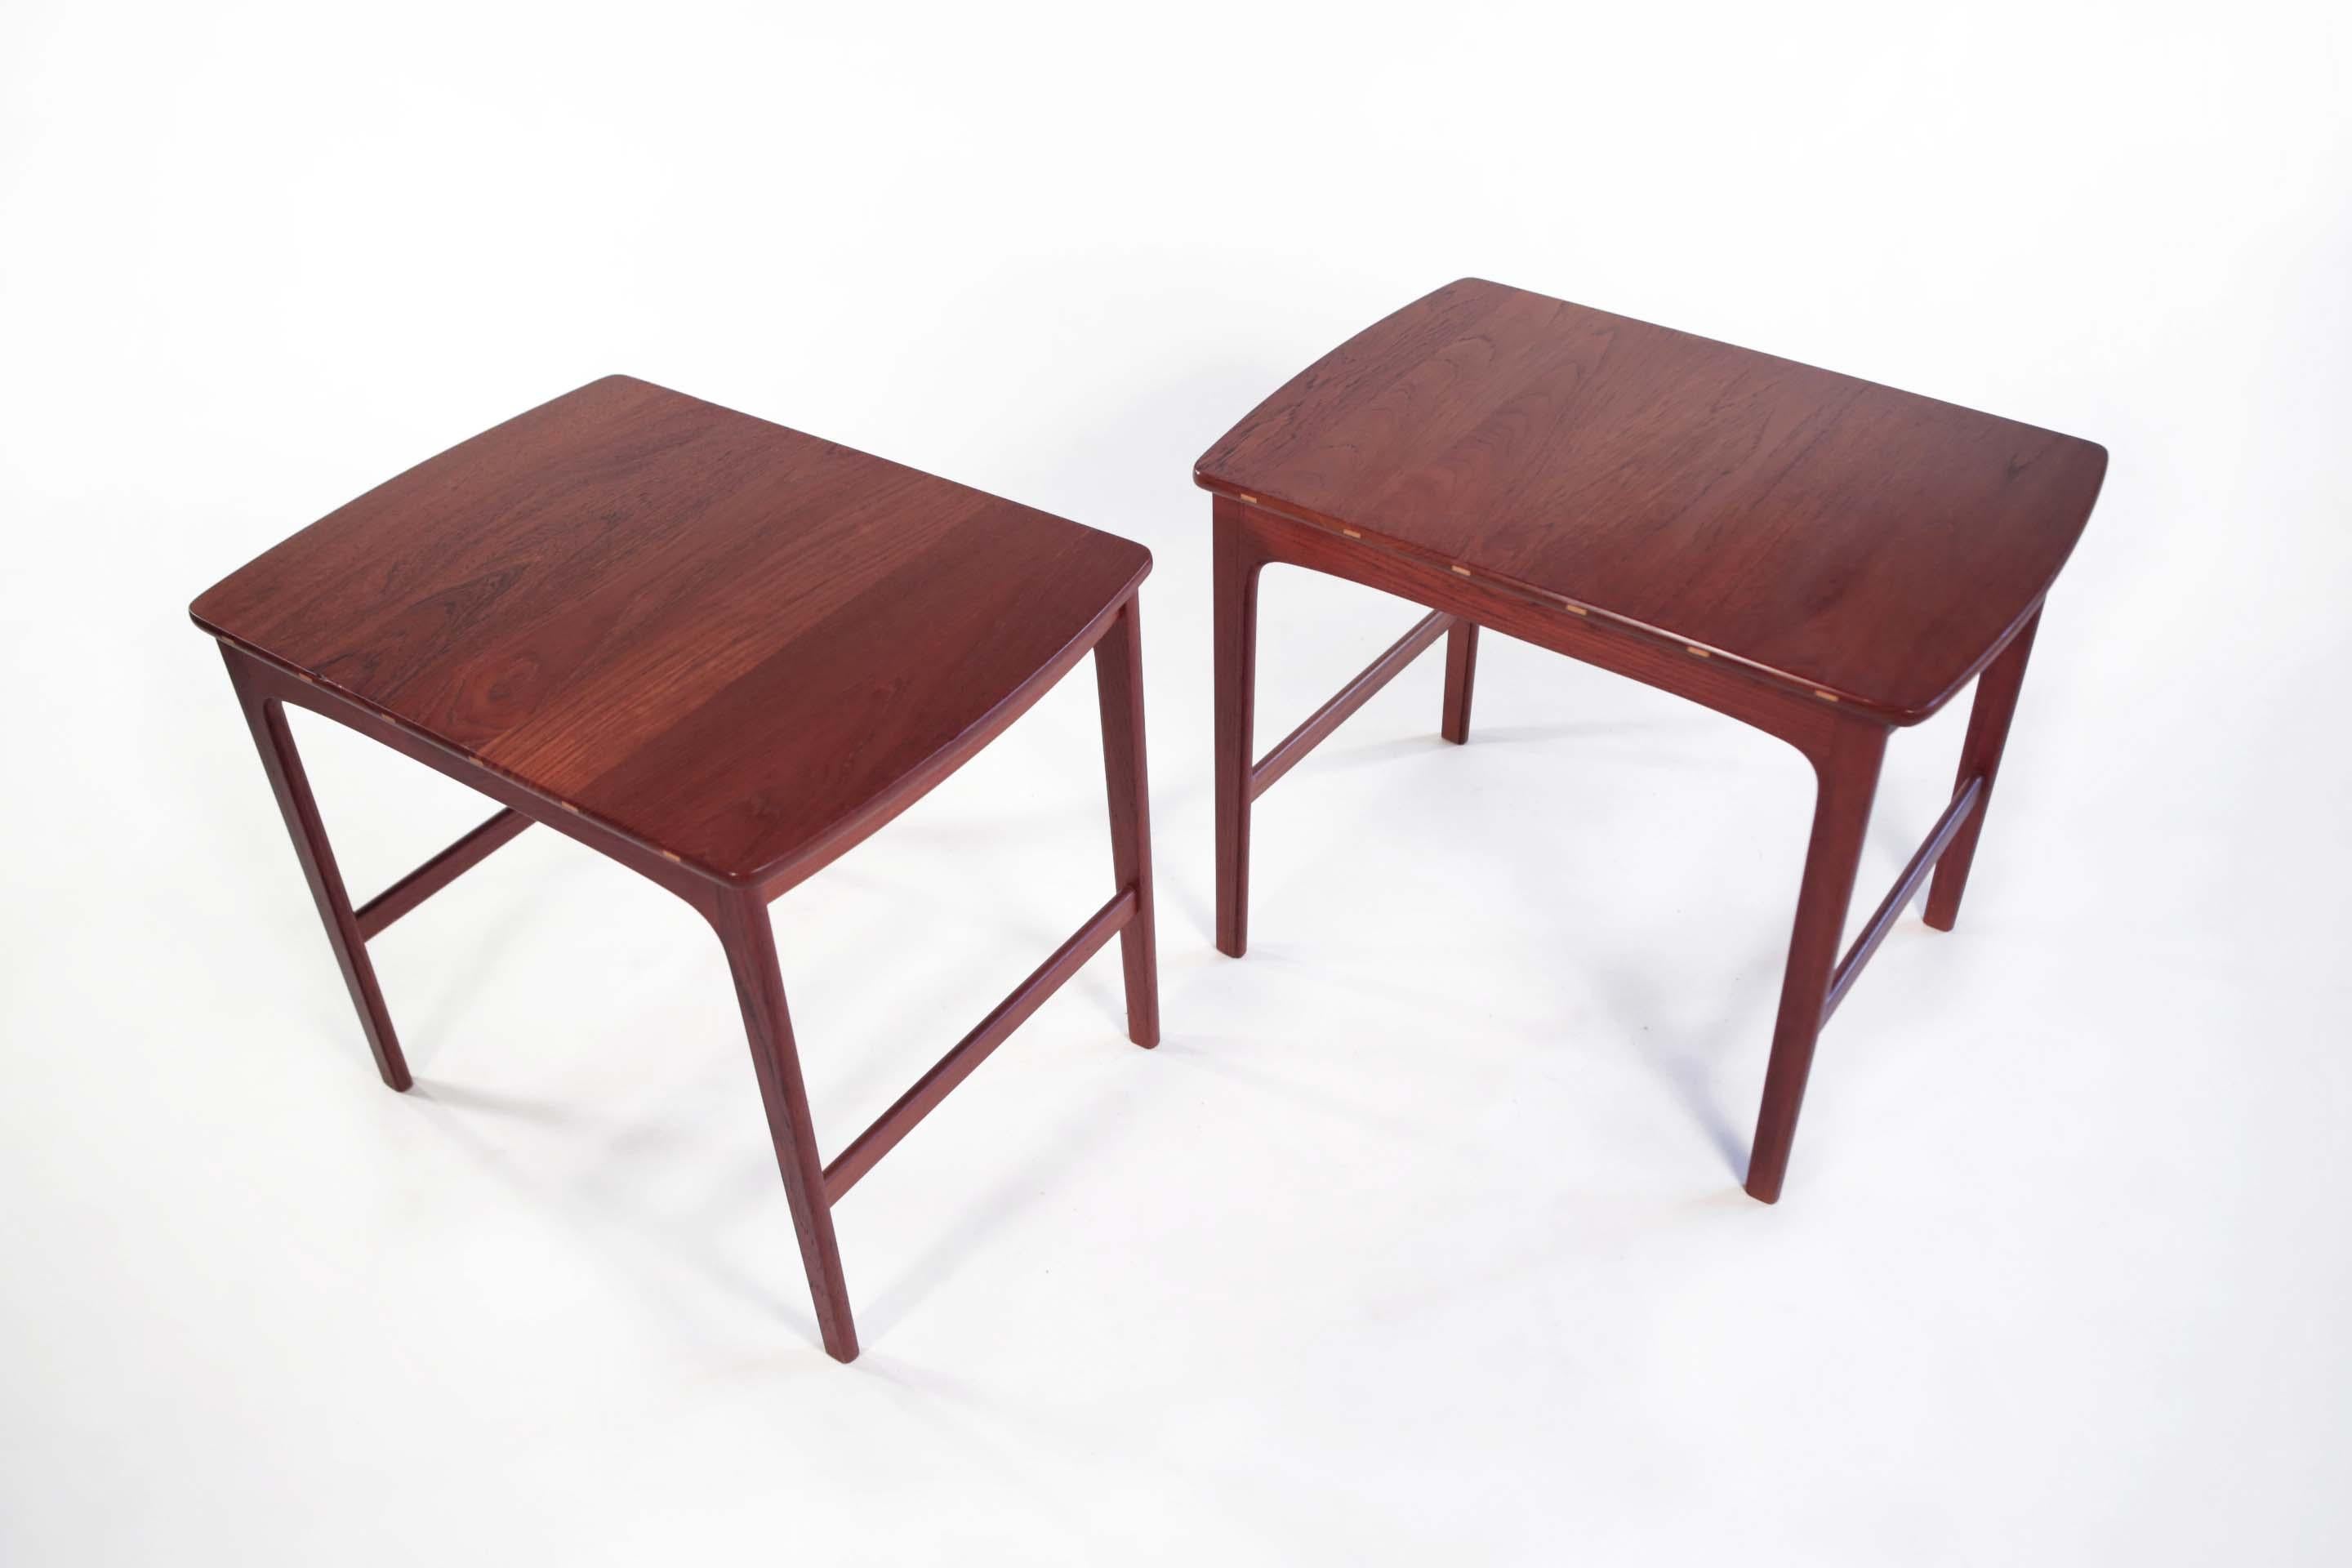 Yngvar Sandstrom side tables in solid teak by AB Seffle Møbelfabrik, Sweden, 1960s

Pair of Scandinavian side tables in solid teak by Yngvar Sandstrom by AB Seffle Møbelfabrik, Sweden 1960.

This piece is a well-known design that is well